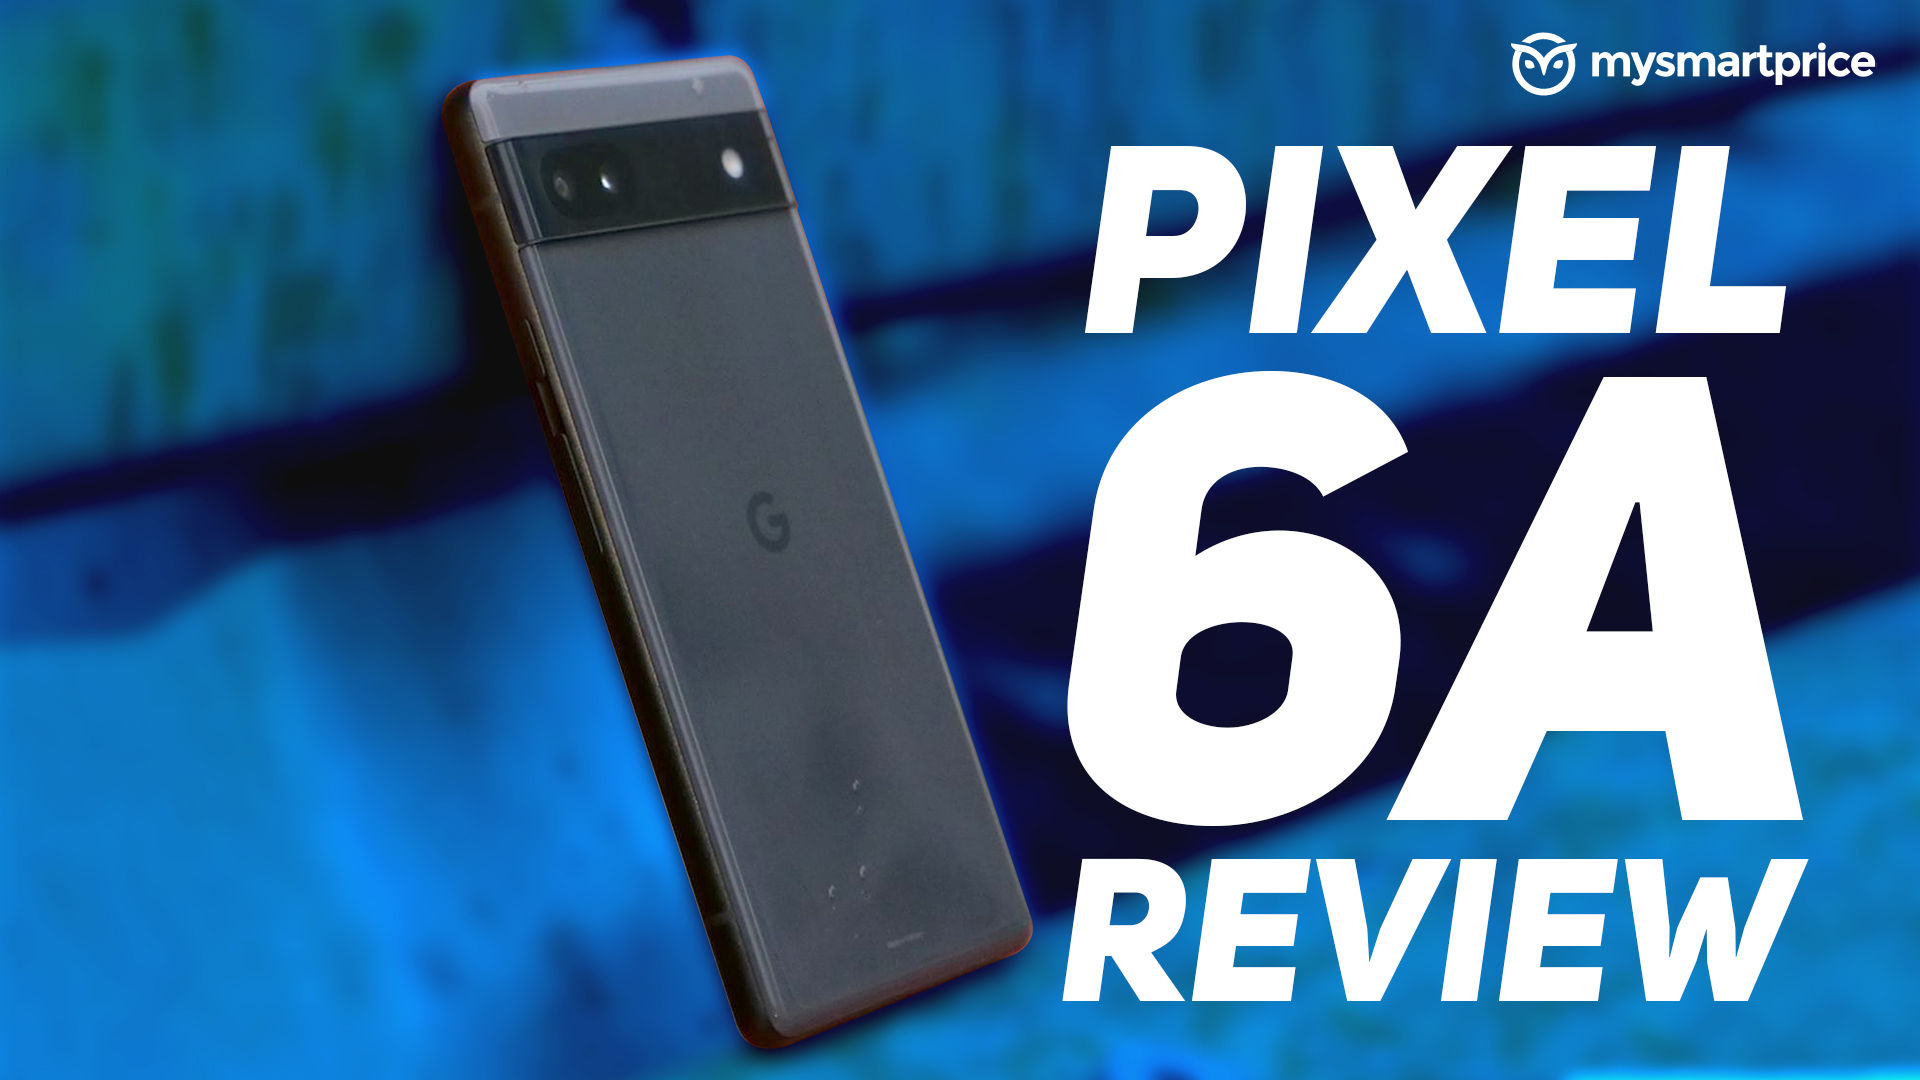 Pixel 6a Review: An Excellent Pixel Phone, Even if No Longer a Game Changer  - MySmartPrice